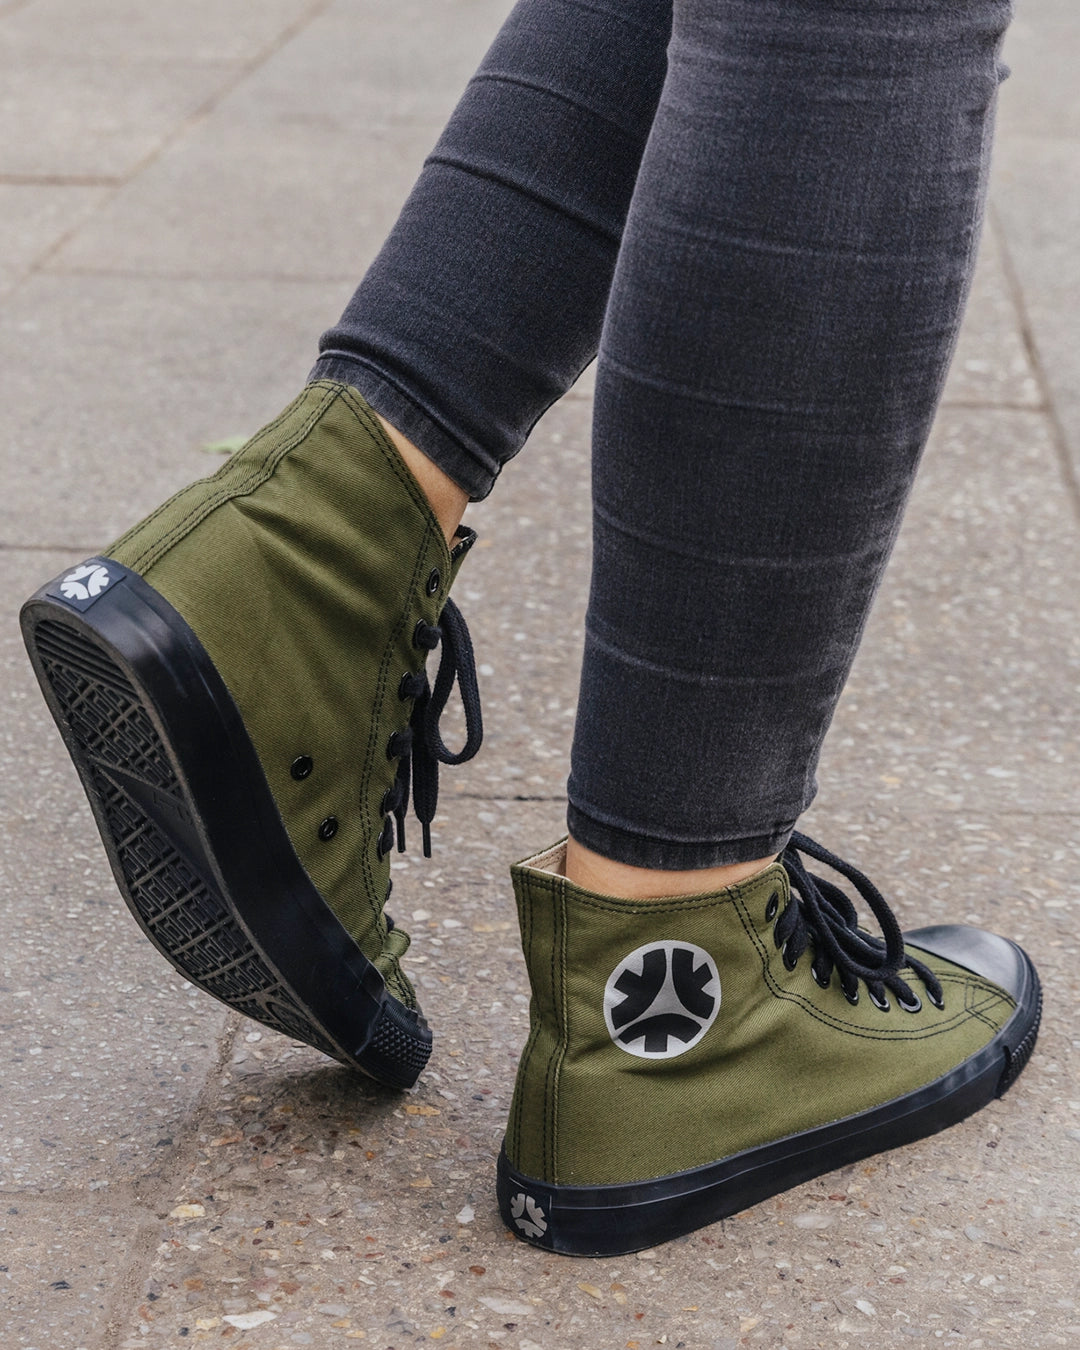 Etiko Ethical Sneakers Vegan High Top Olive and Black Sneakers Organic and Fairtrade Certified 